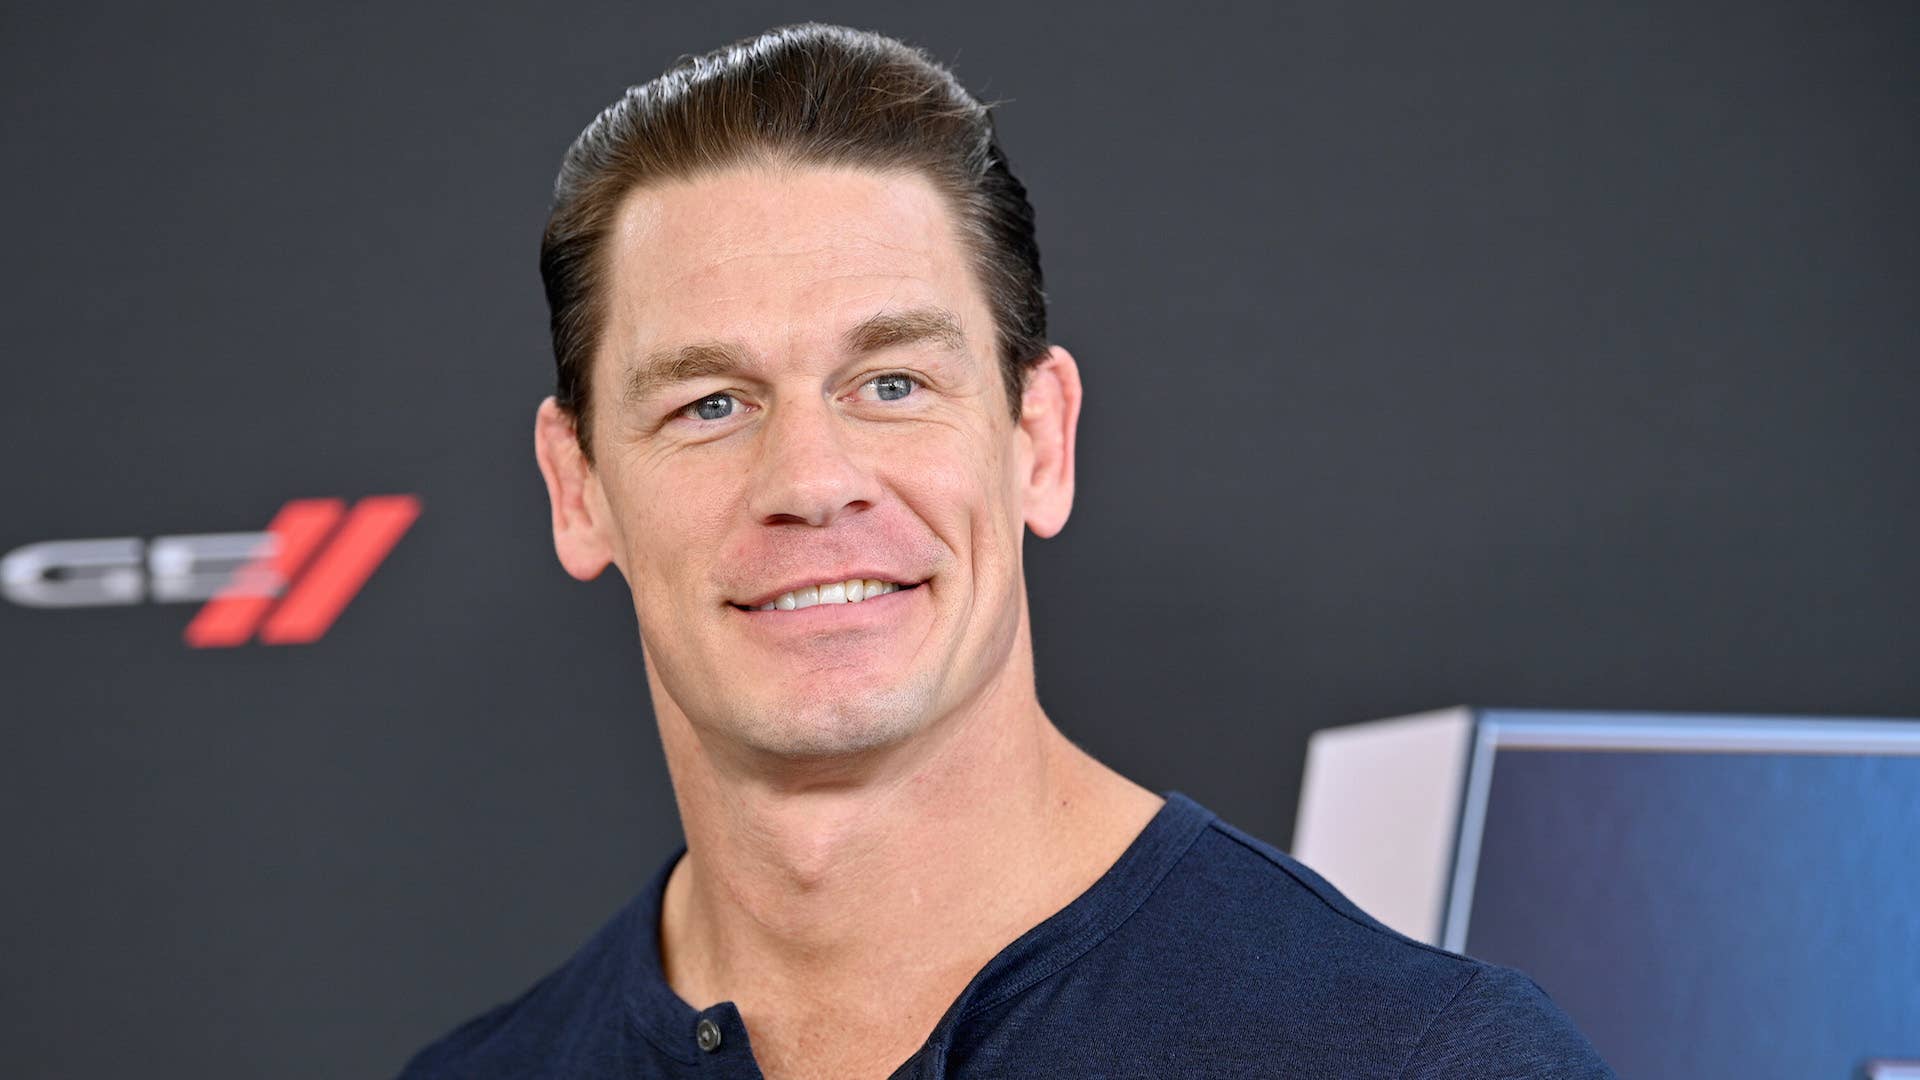 John Cena attends "The Road to F9" Global Fan Extravaganza